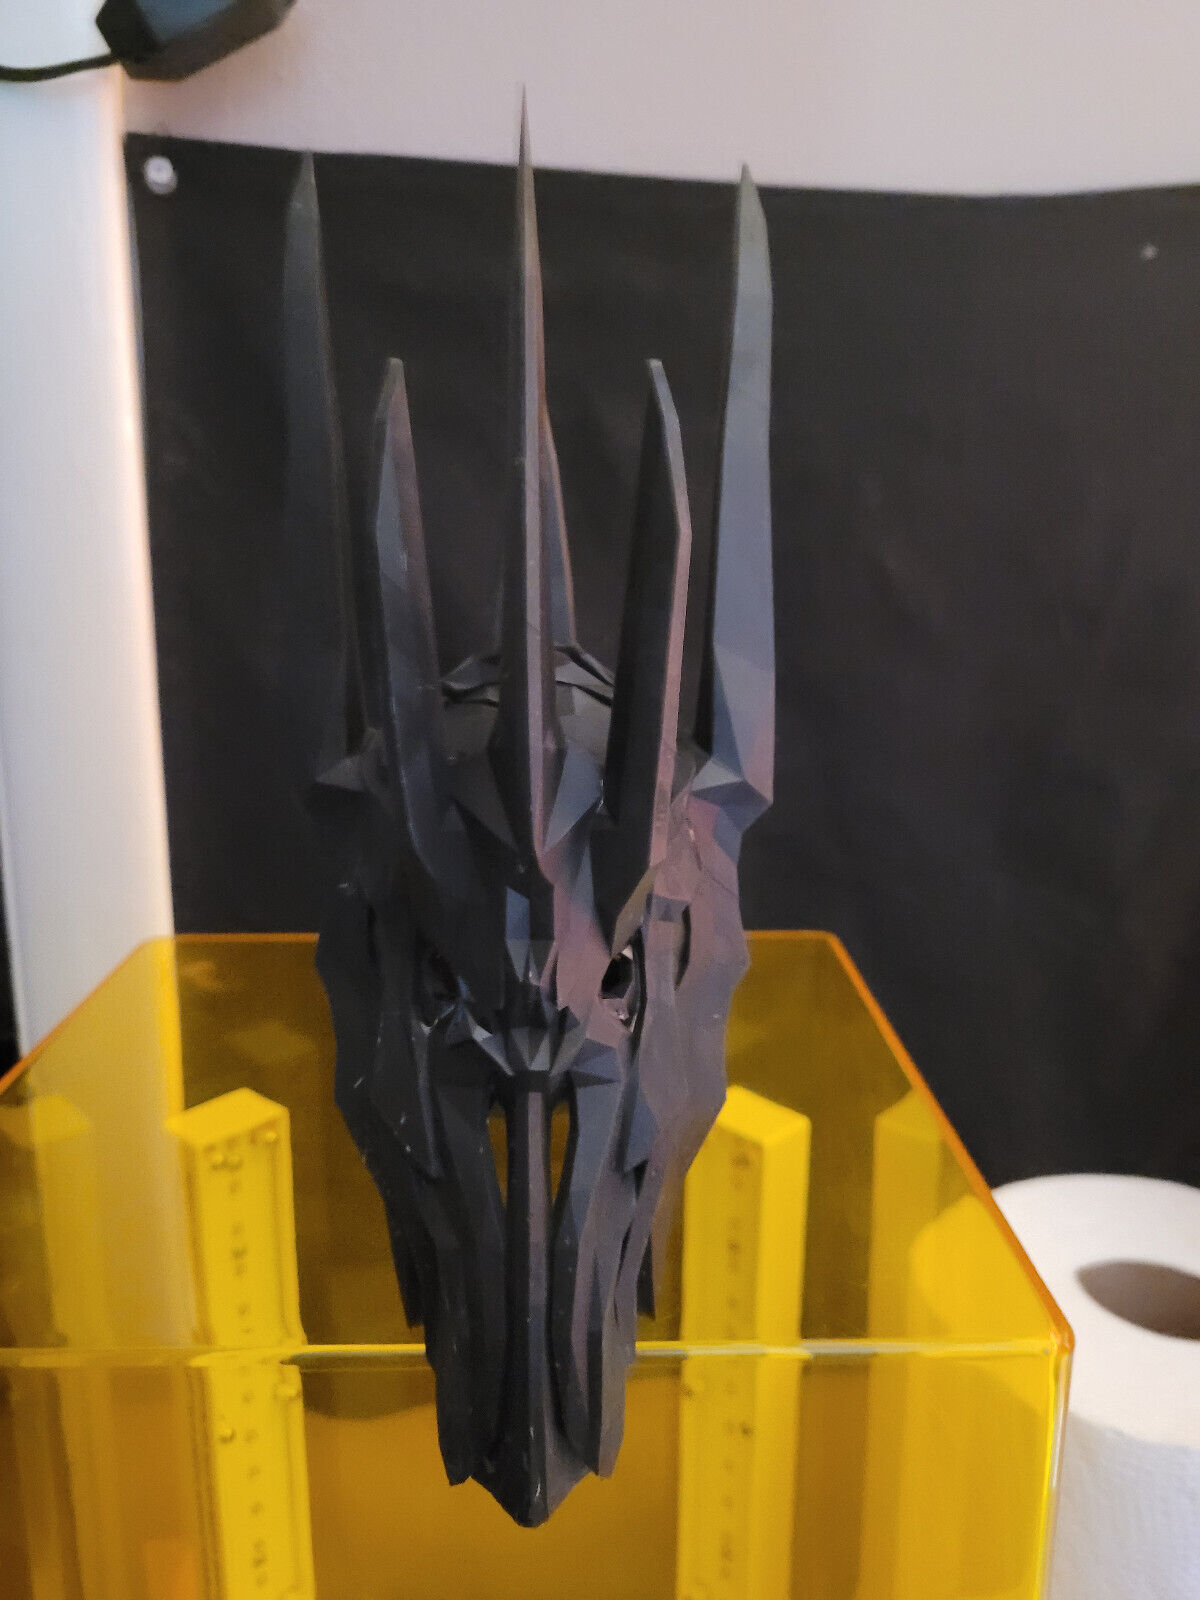 LORD OF THE RINGS - SAURON HELMET - 3D PRINTED - XL